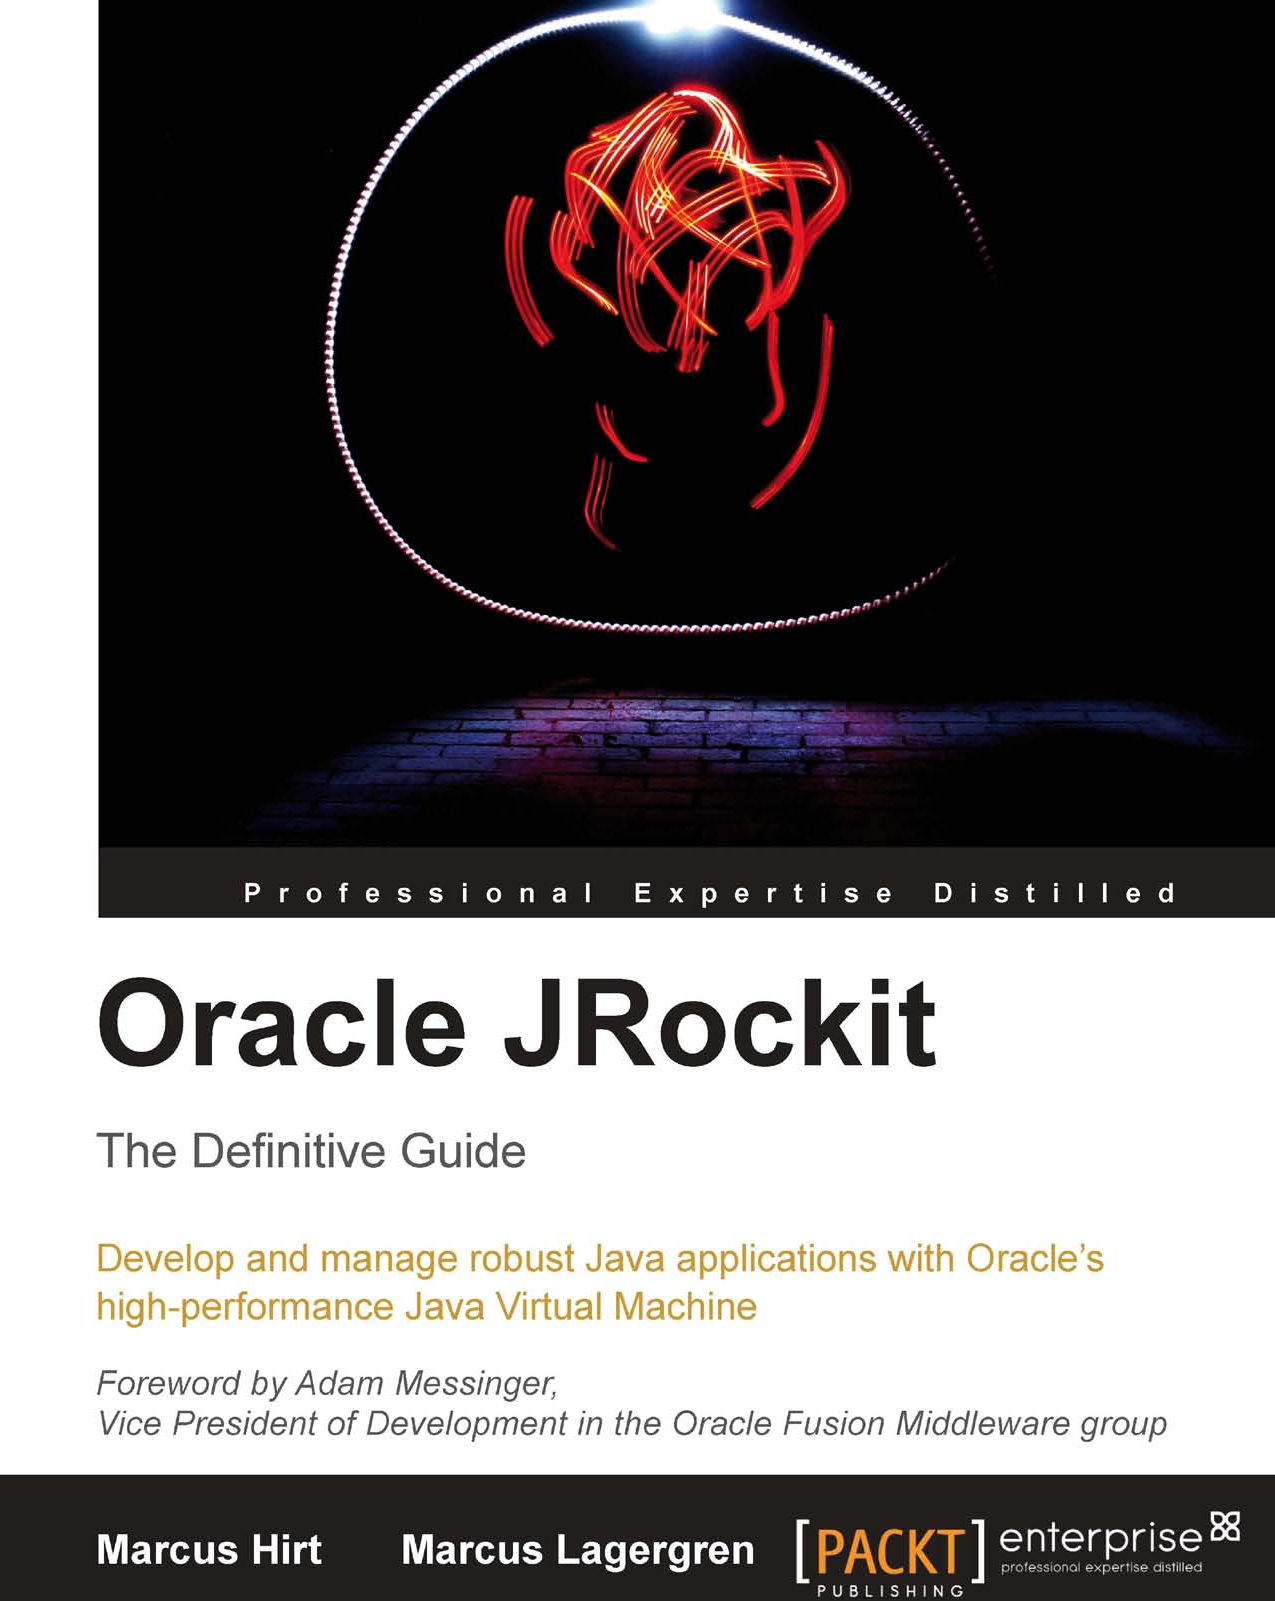 Oracle JRockit The Definitive Guide